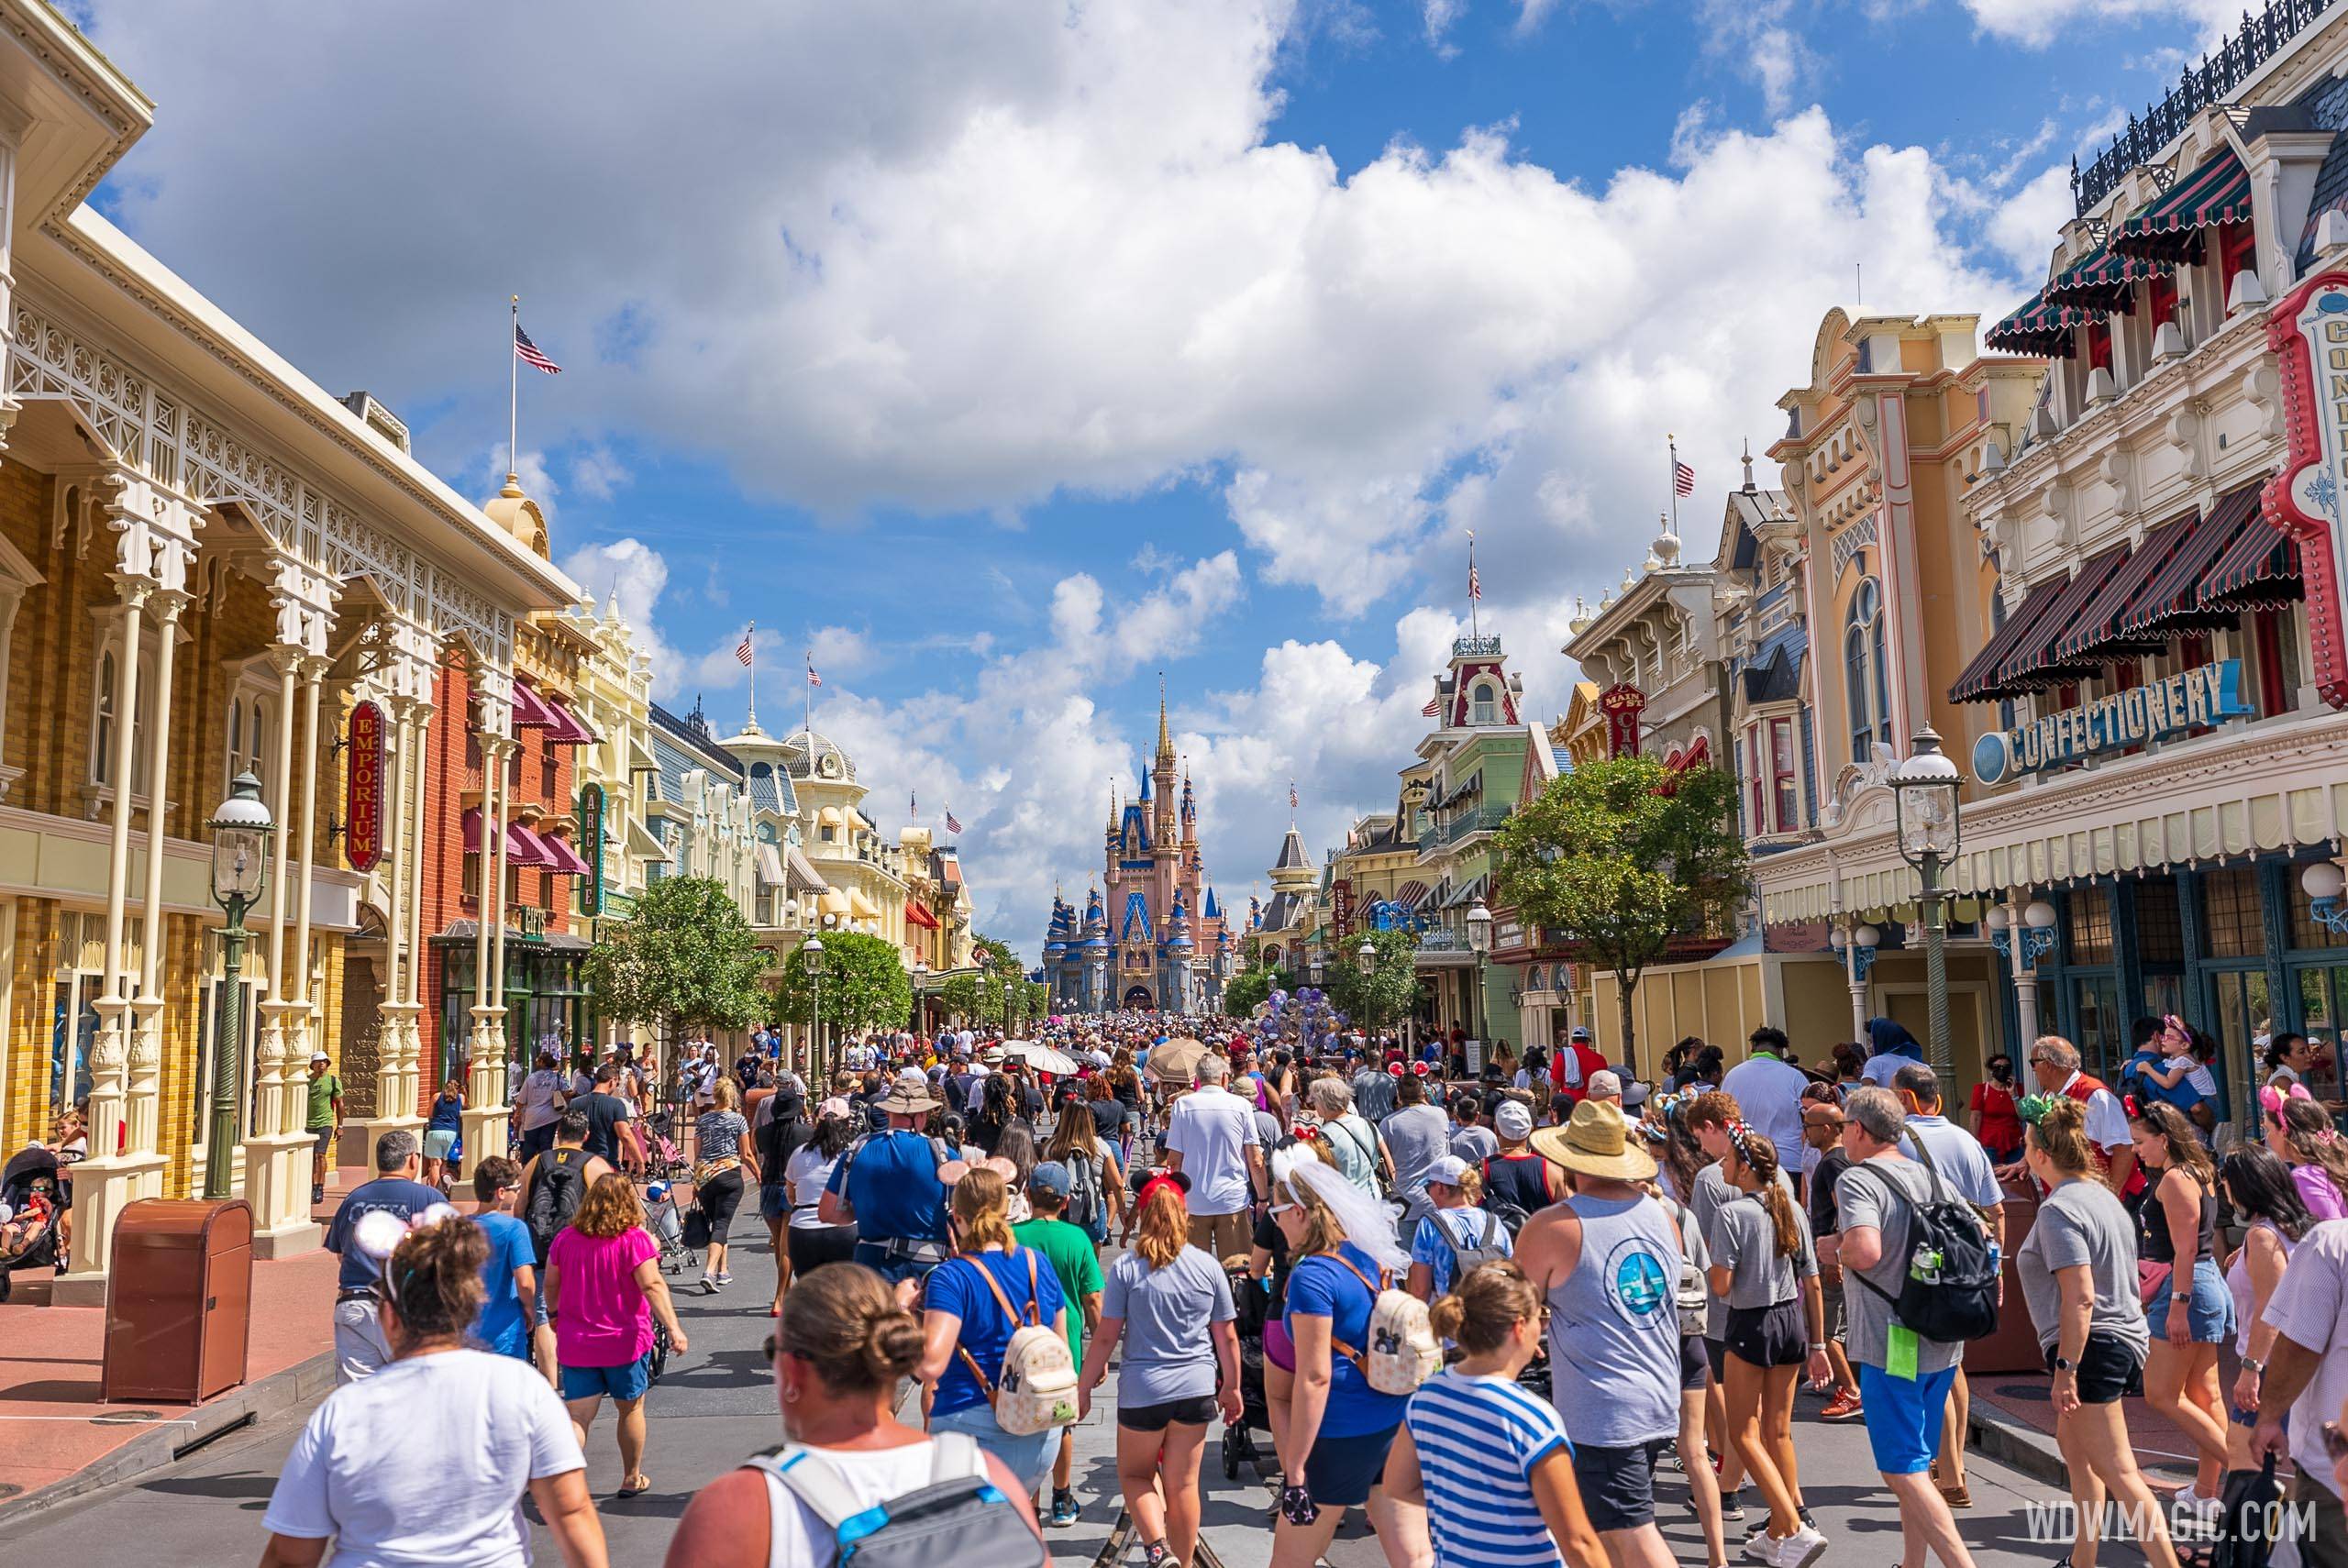 The vast majority of Disney World guests do not wear masks, despite Disney's advice that only those who are vaccinated should go maskless in all areas